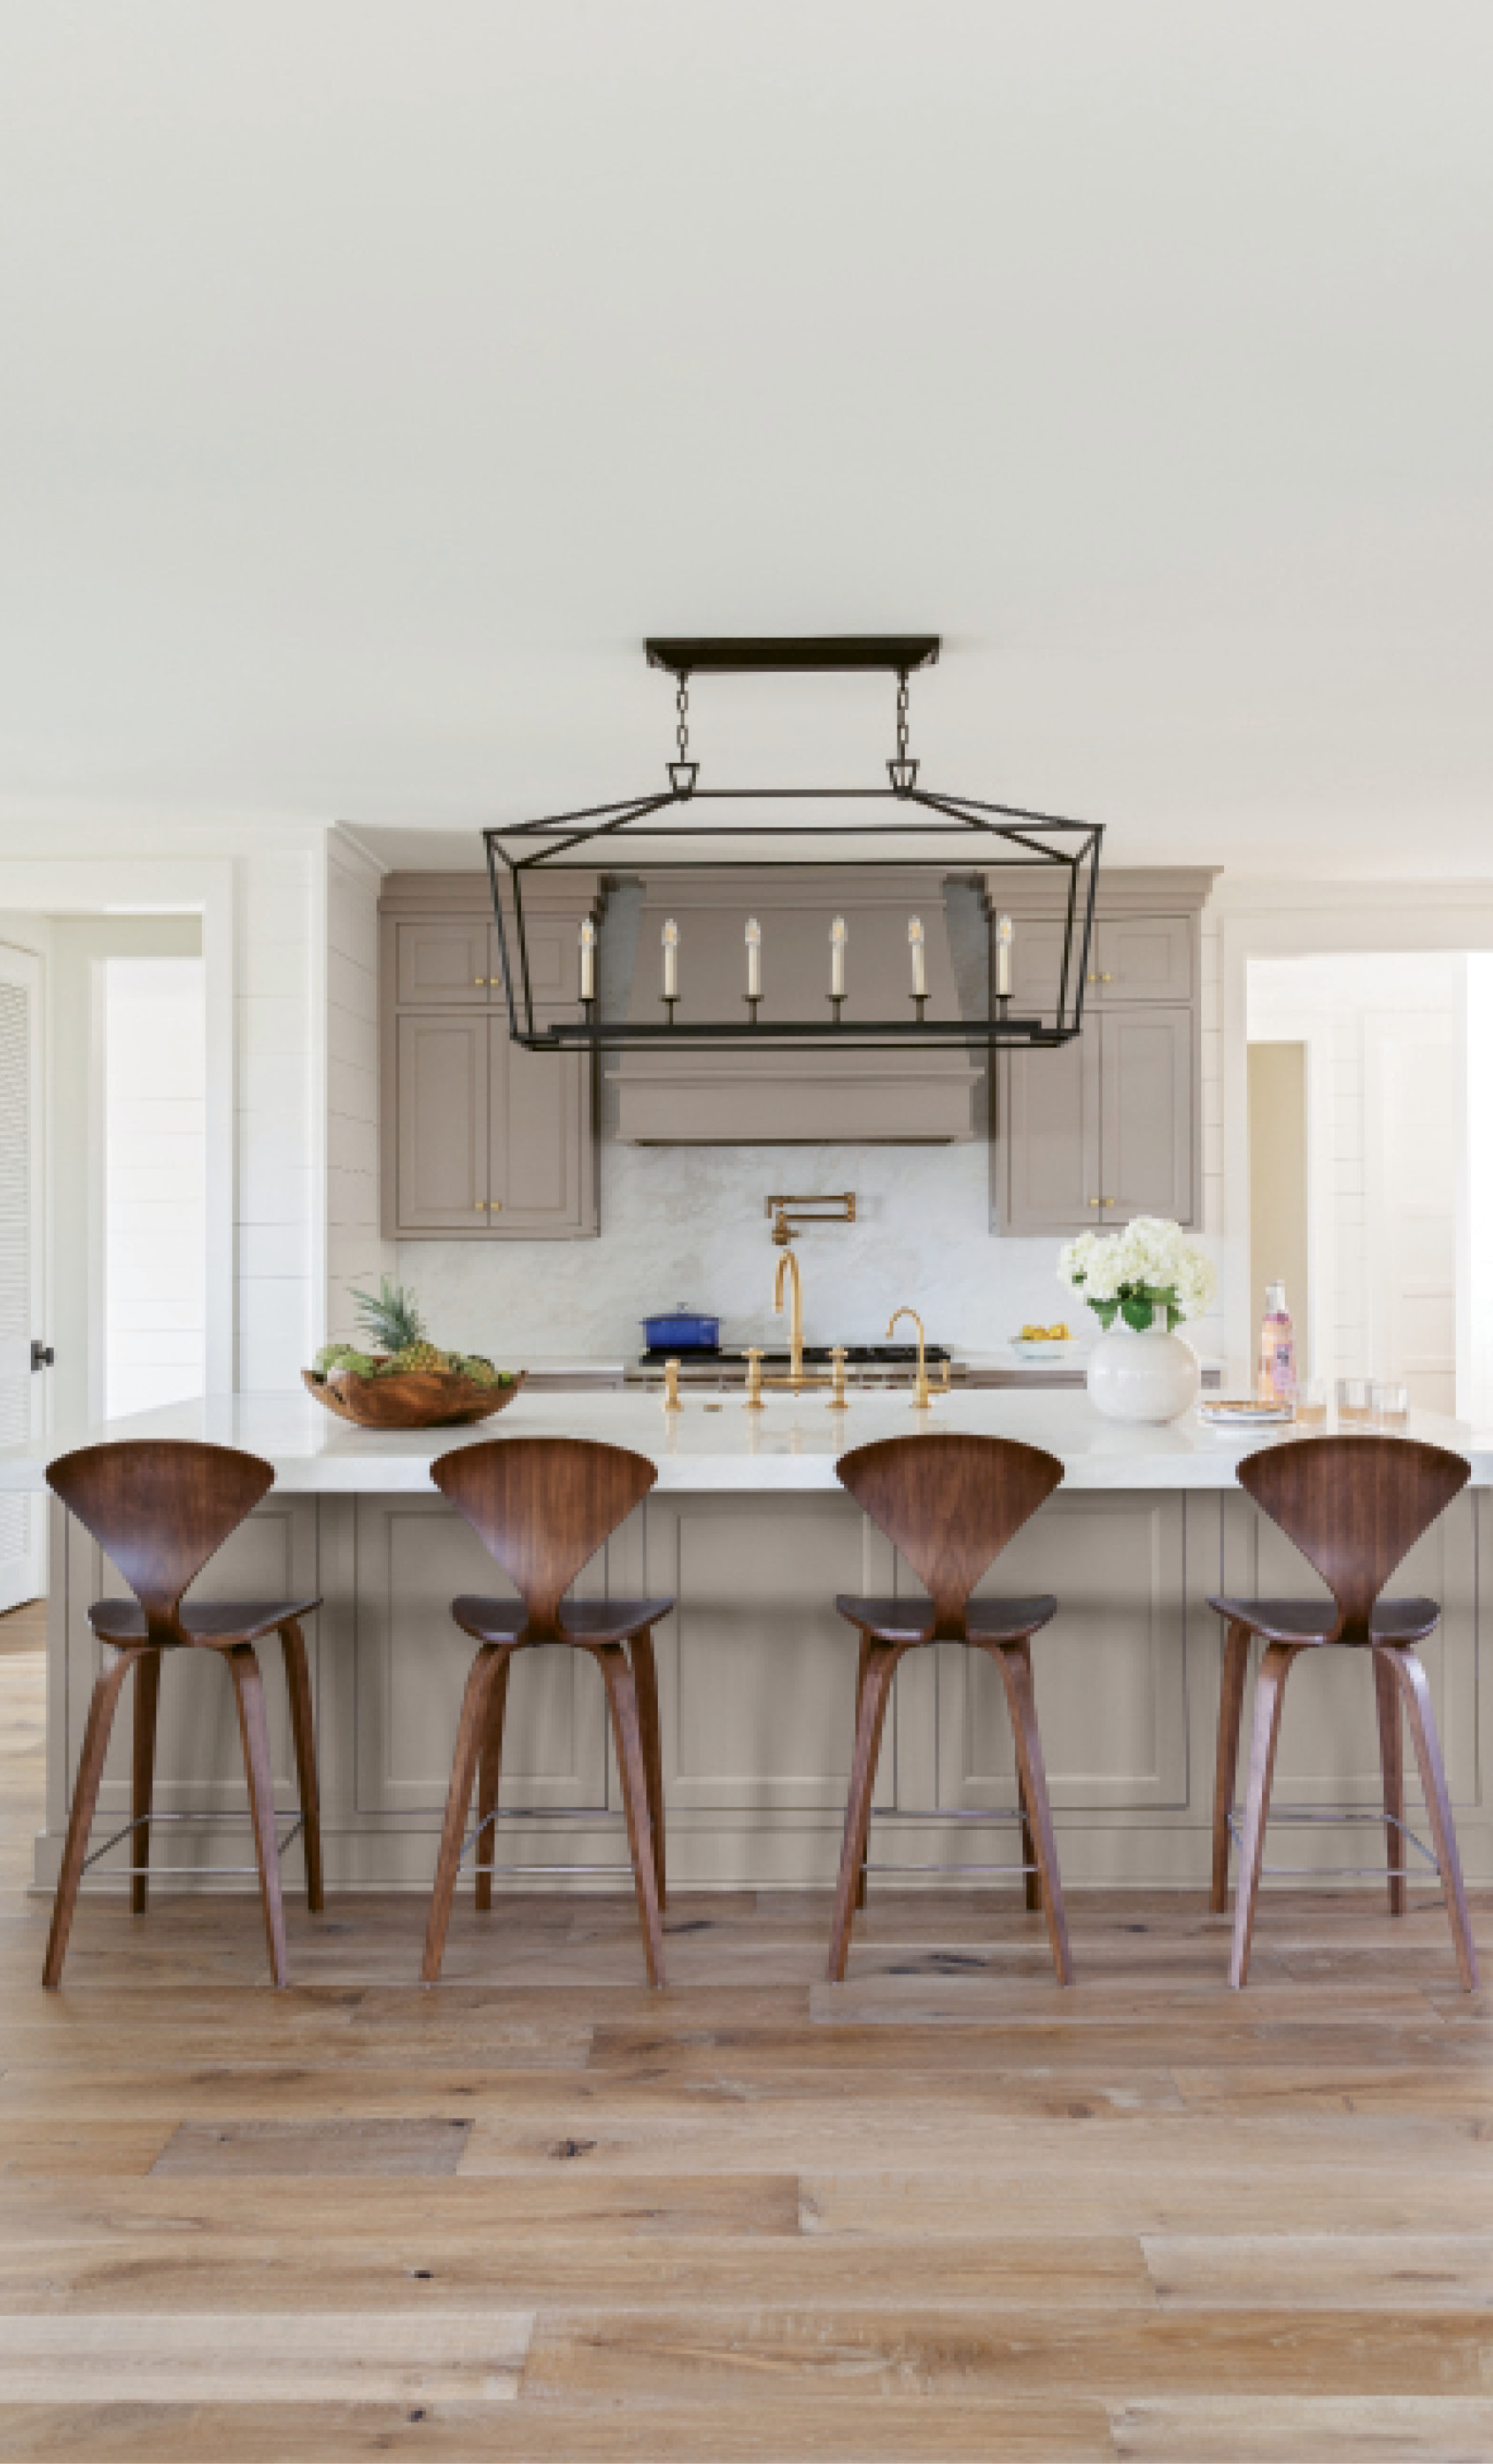 Style &amp; Simplicity: A minimalist kitchen is accented by mid-century modern stools from Design Within Reach, while the usual cooking accoutrements can be found in the butler’s pantry, right off the kitchen.